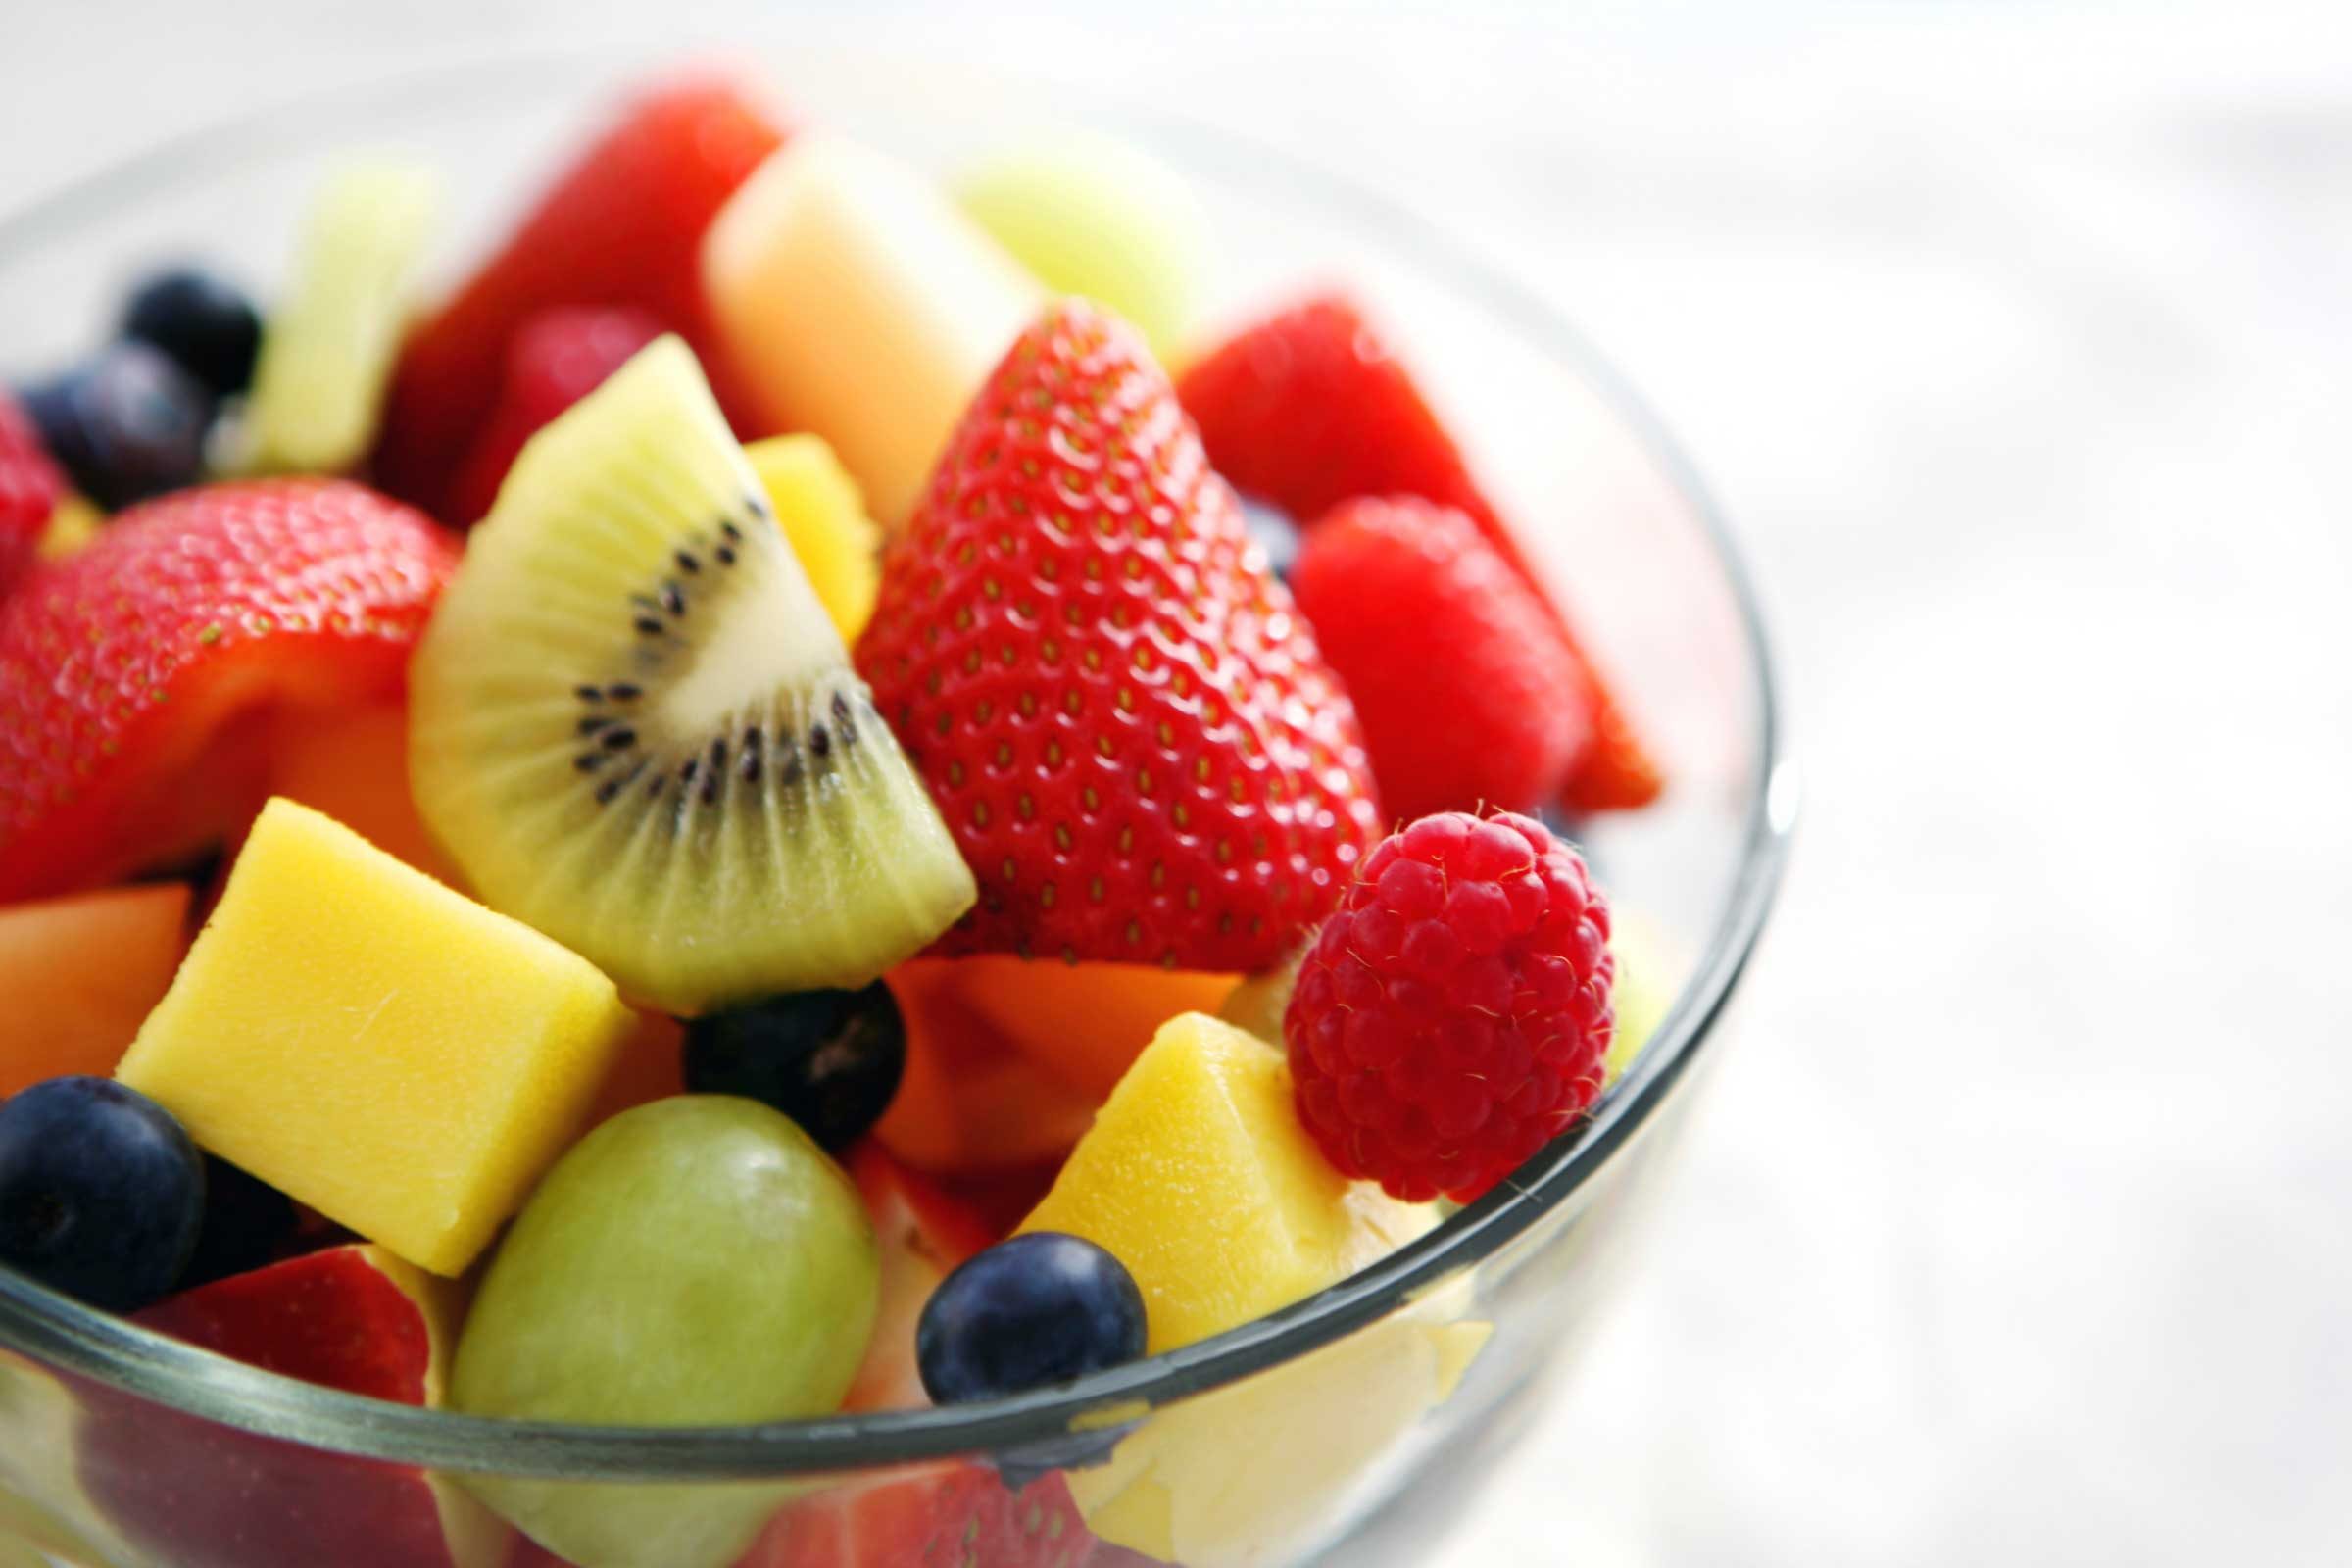 Can you eat fruit as a type 2 diabetic?